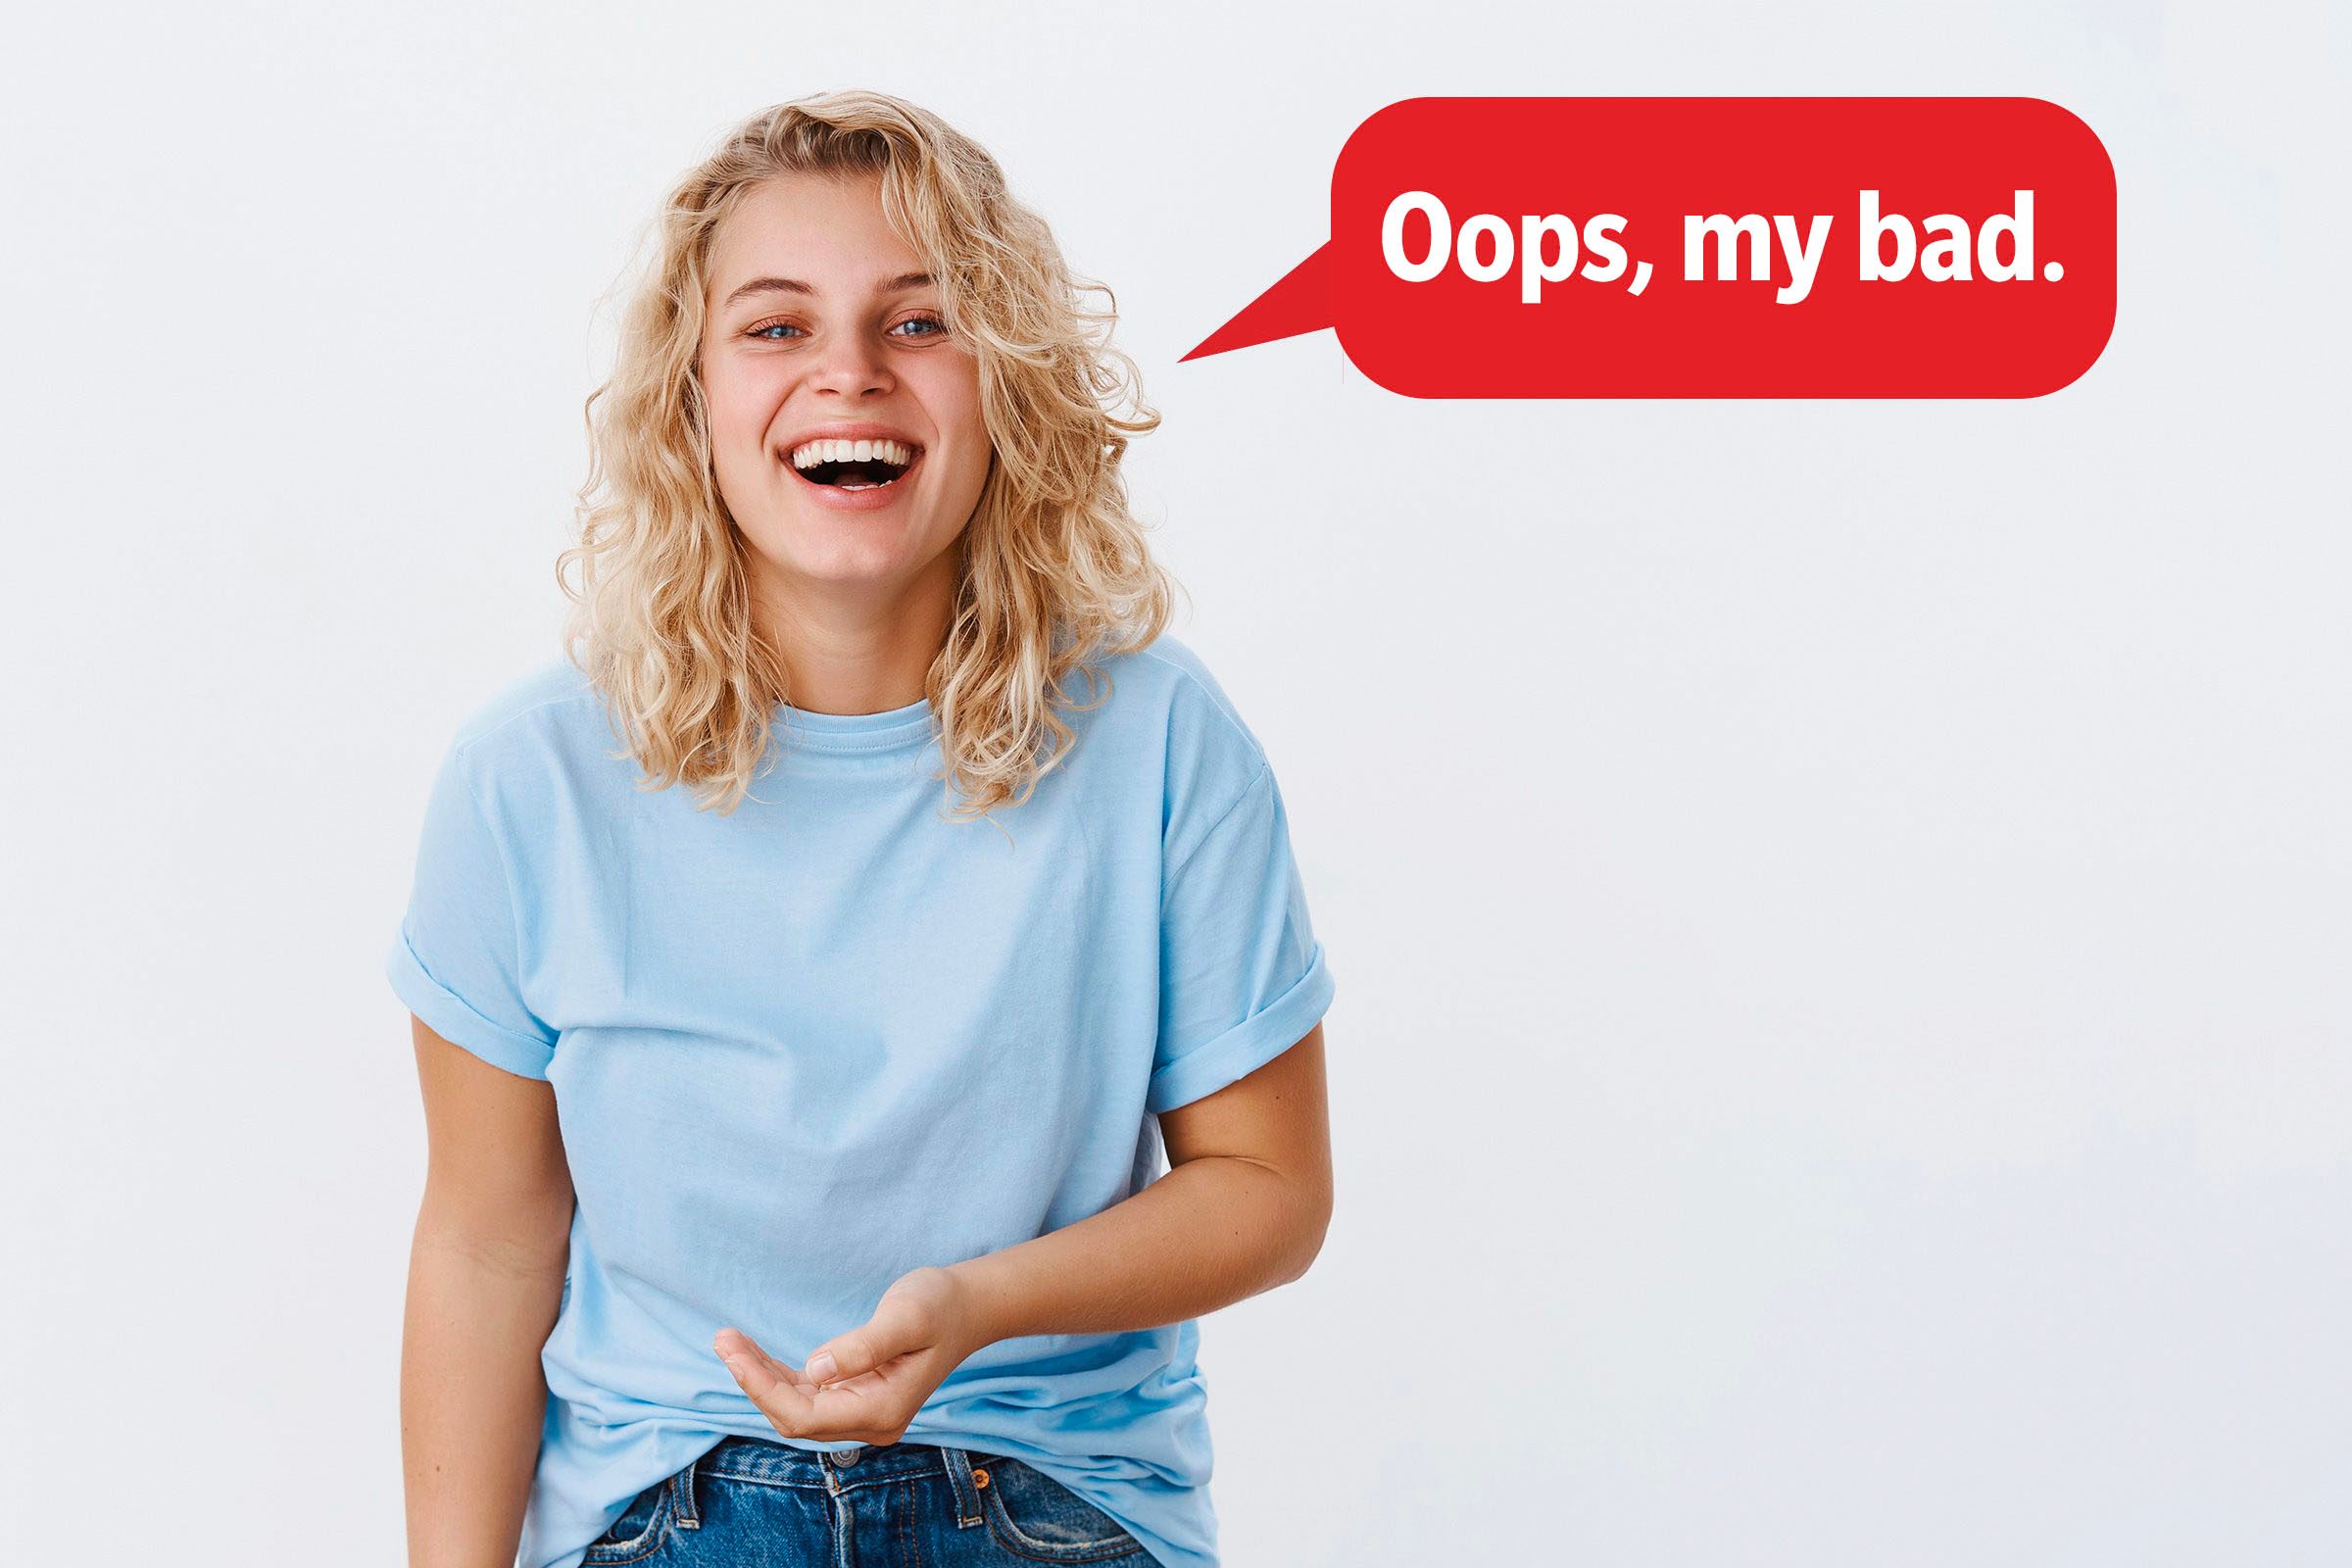 Laughing woman delivering a comeback roast, speech bubble text: "Oops, my bad."